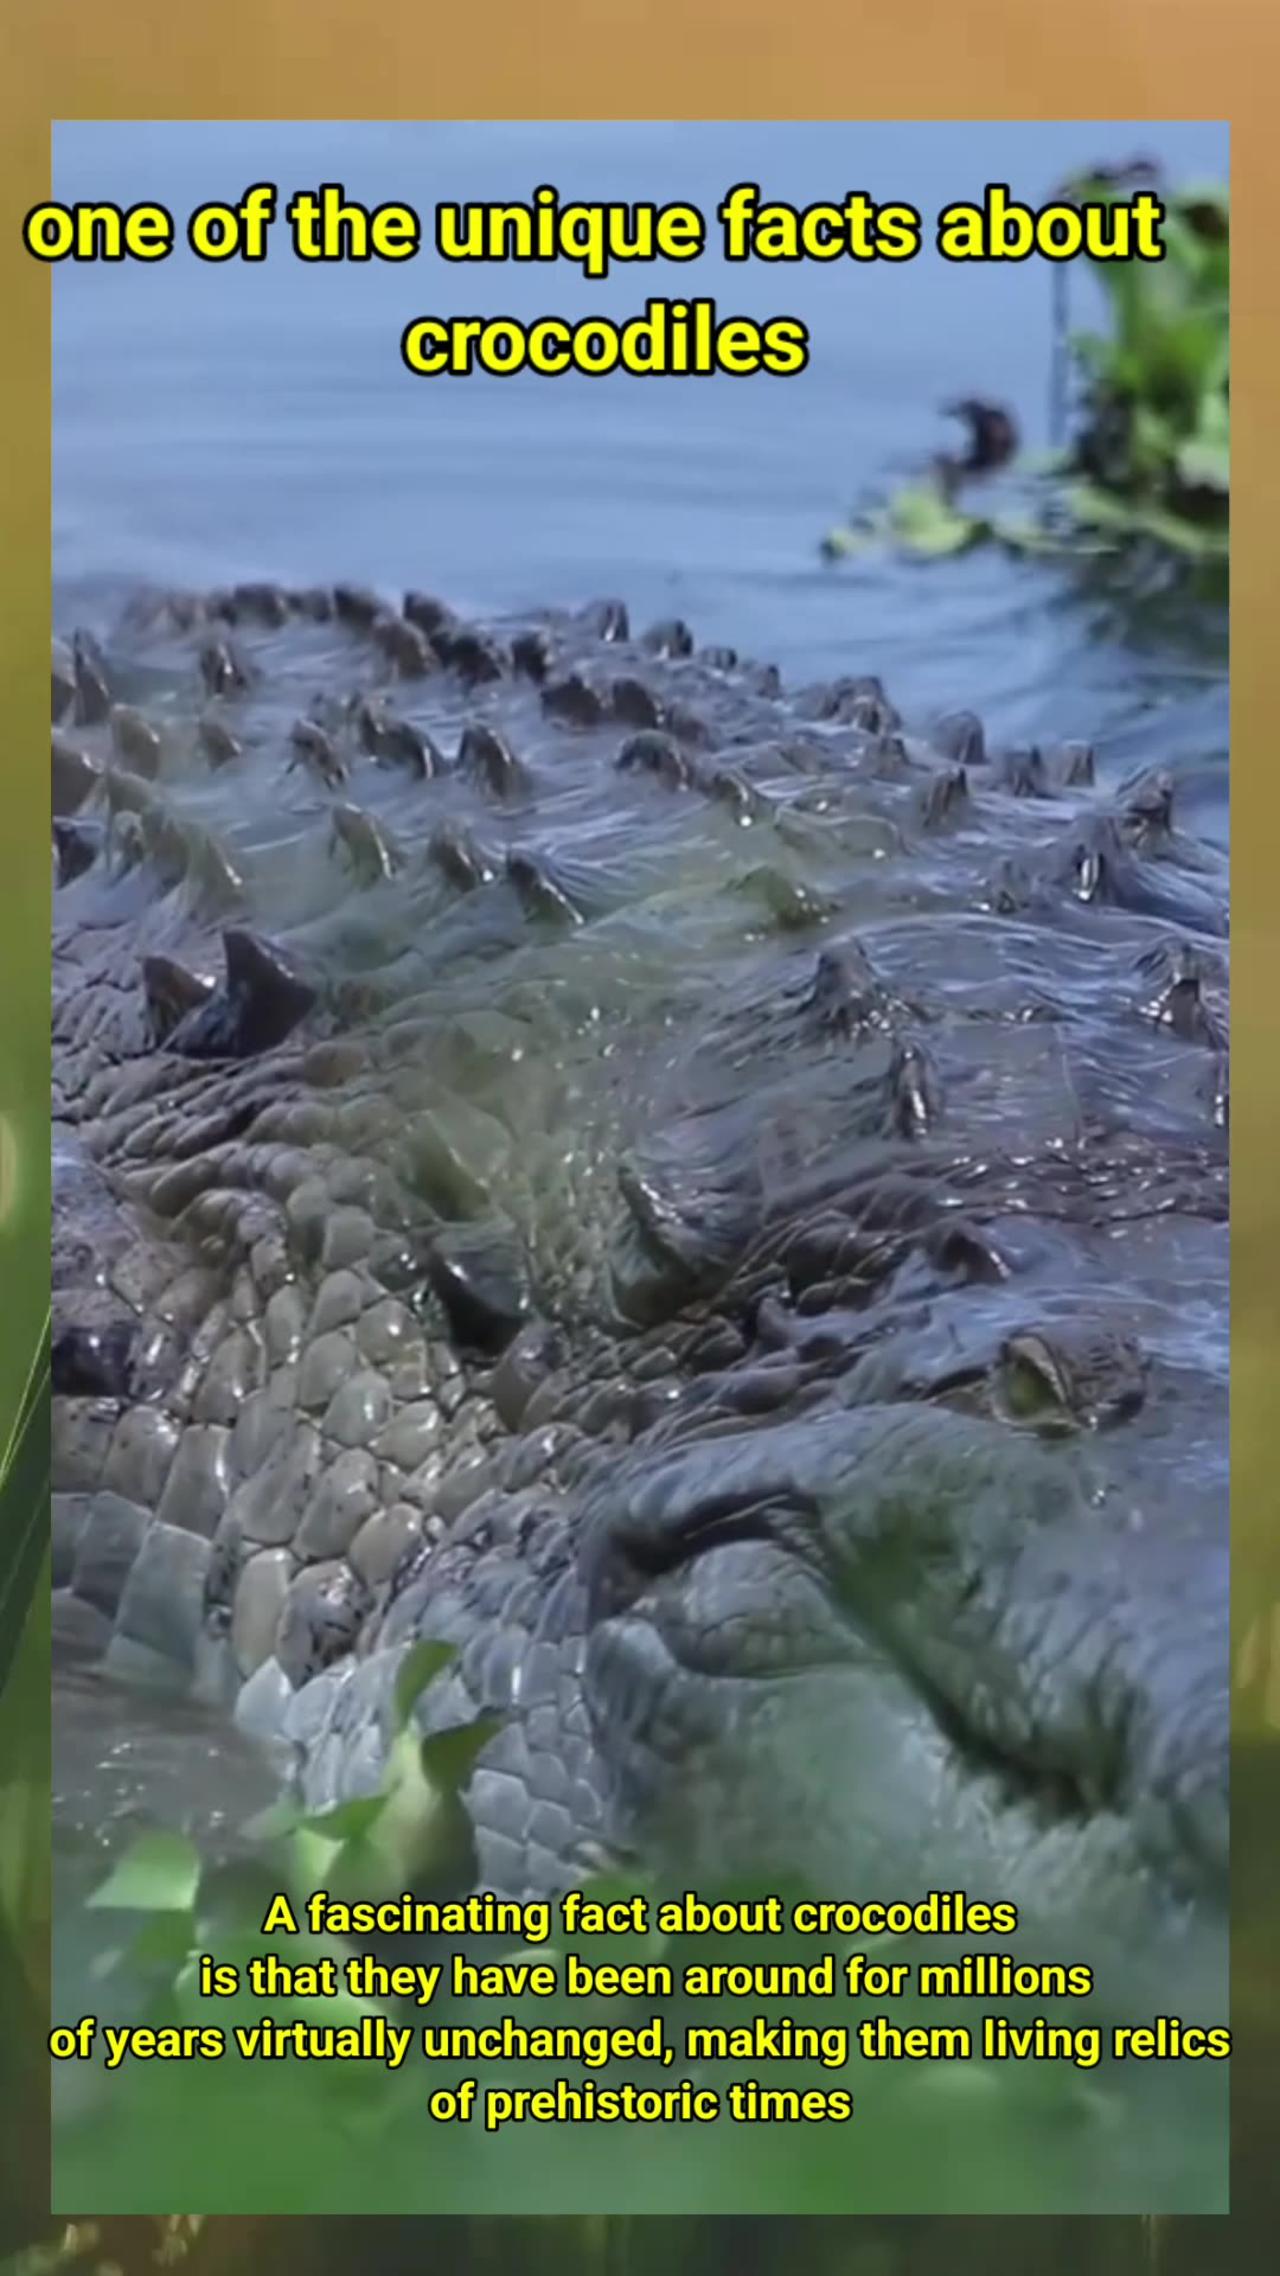 one of the unique facts about crocodiles